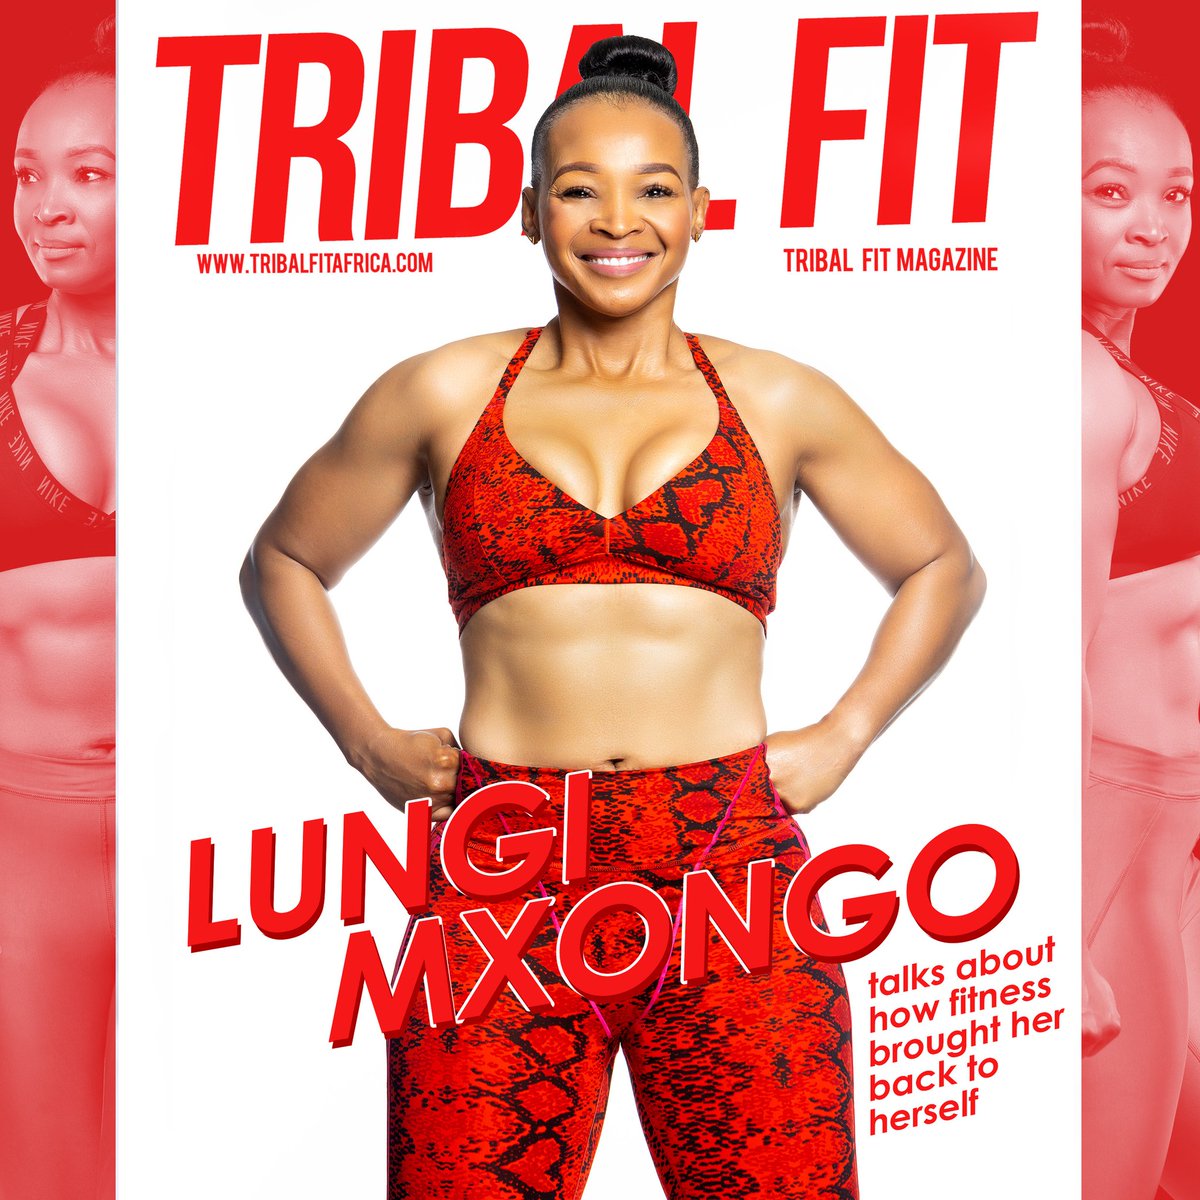 In this episode, Lungi Mxongo (@lungsmxo]) spends the morning with us discussing how staying on track with her fitness goals helps her be resilient. Visit tribalfitafrica.com to read the full feature